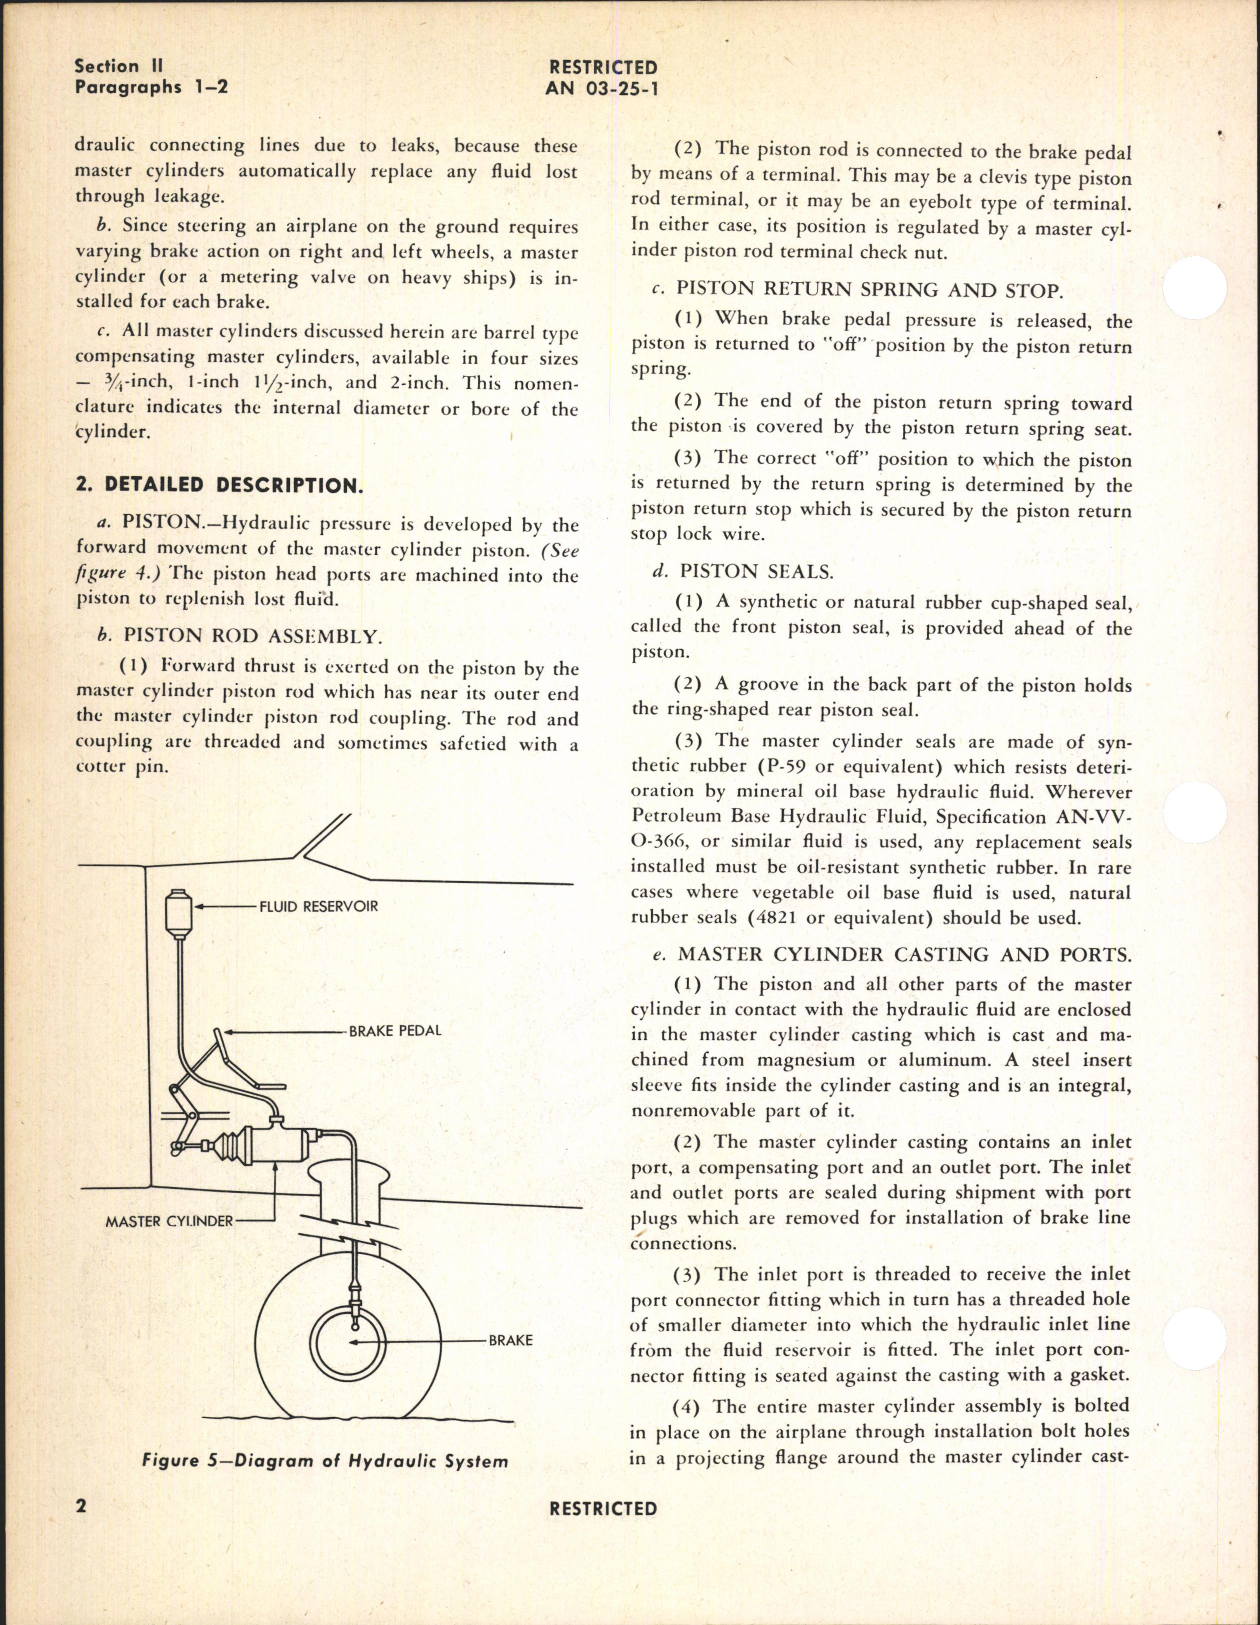 Sample page 6 from AirCorps Library document: Handbook of Instructions with Parts Catalog for Master Brake Cylinders (Goodyear)